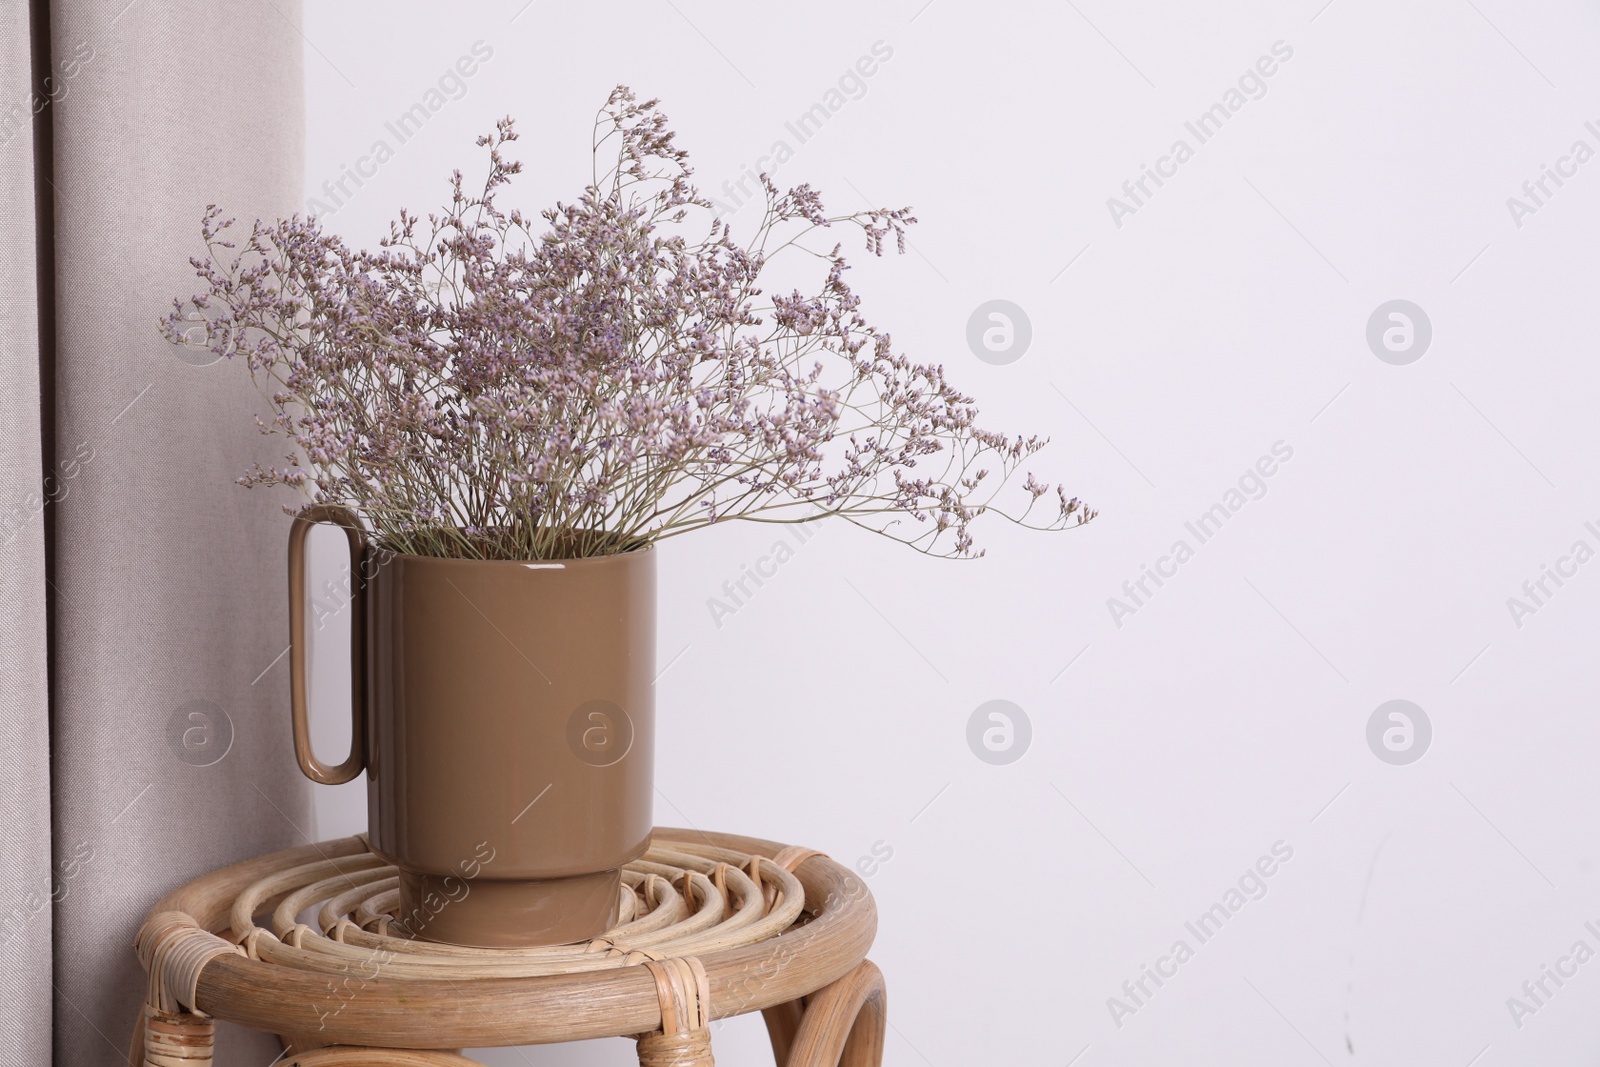 Photo of Ceramic vase with dry flowers on wicker table near white wall. Space for text